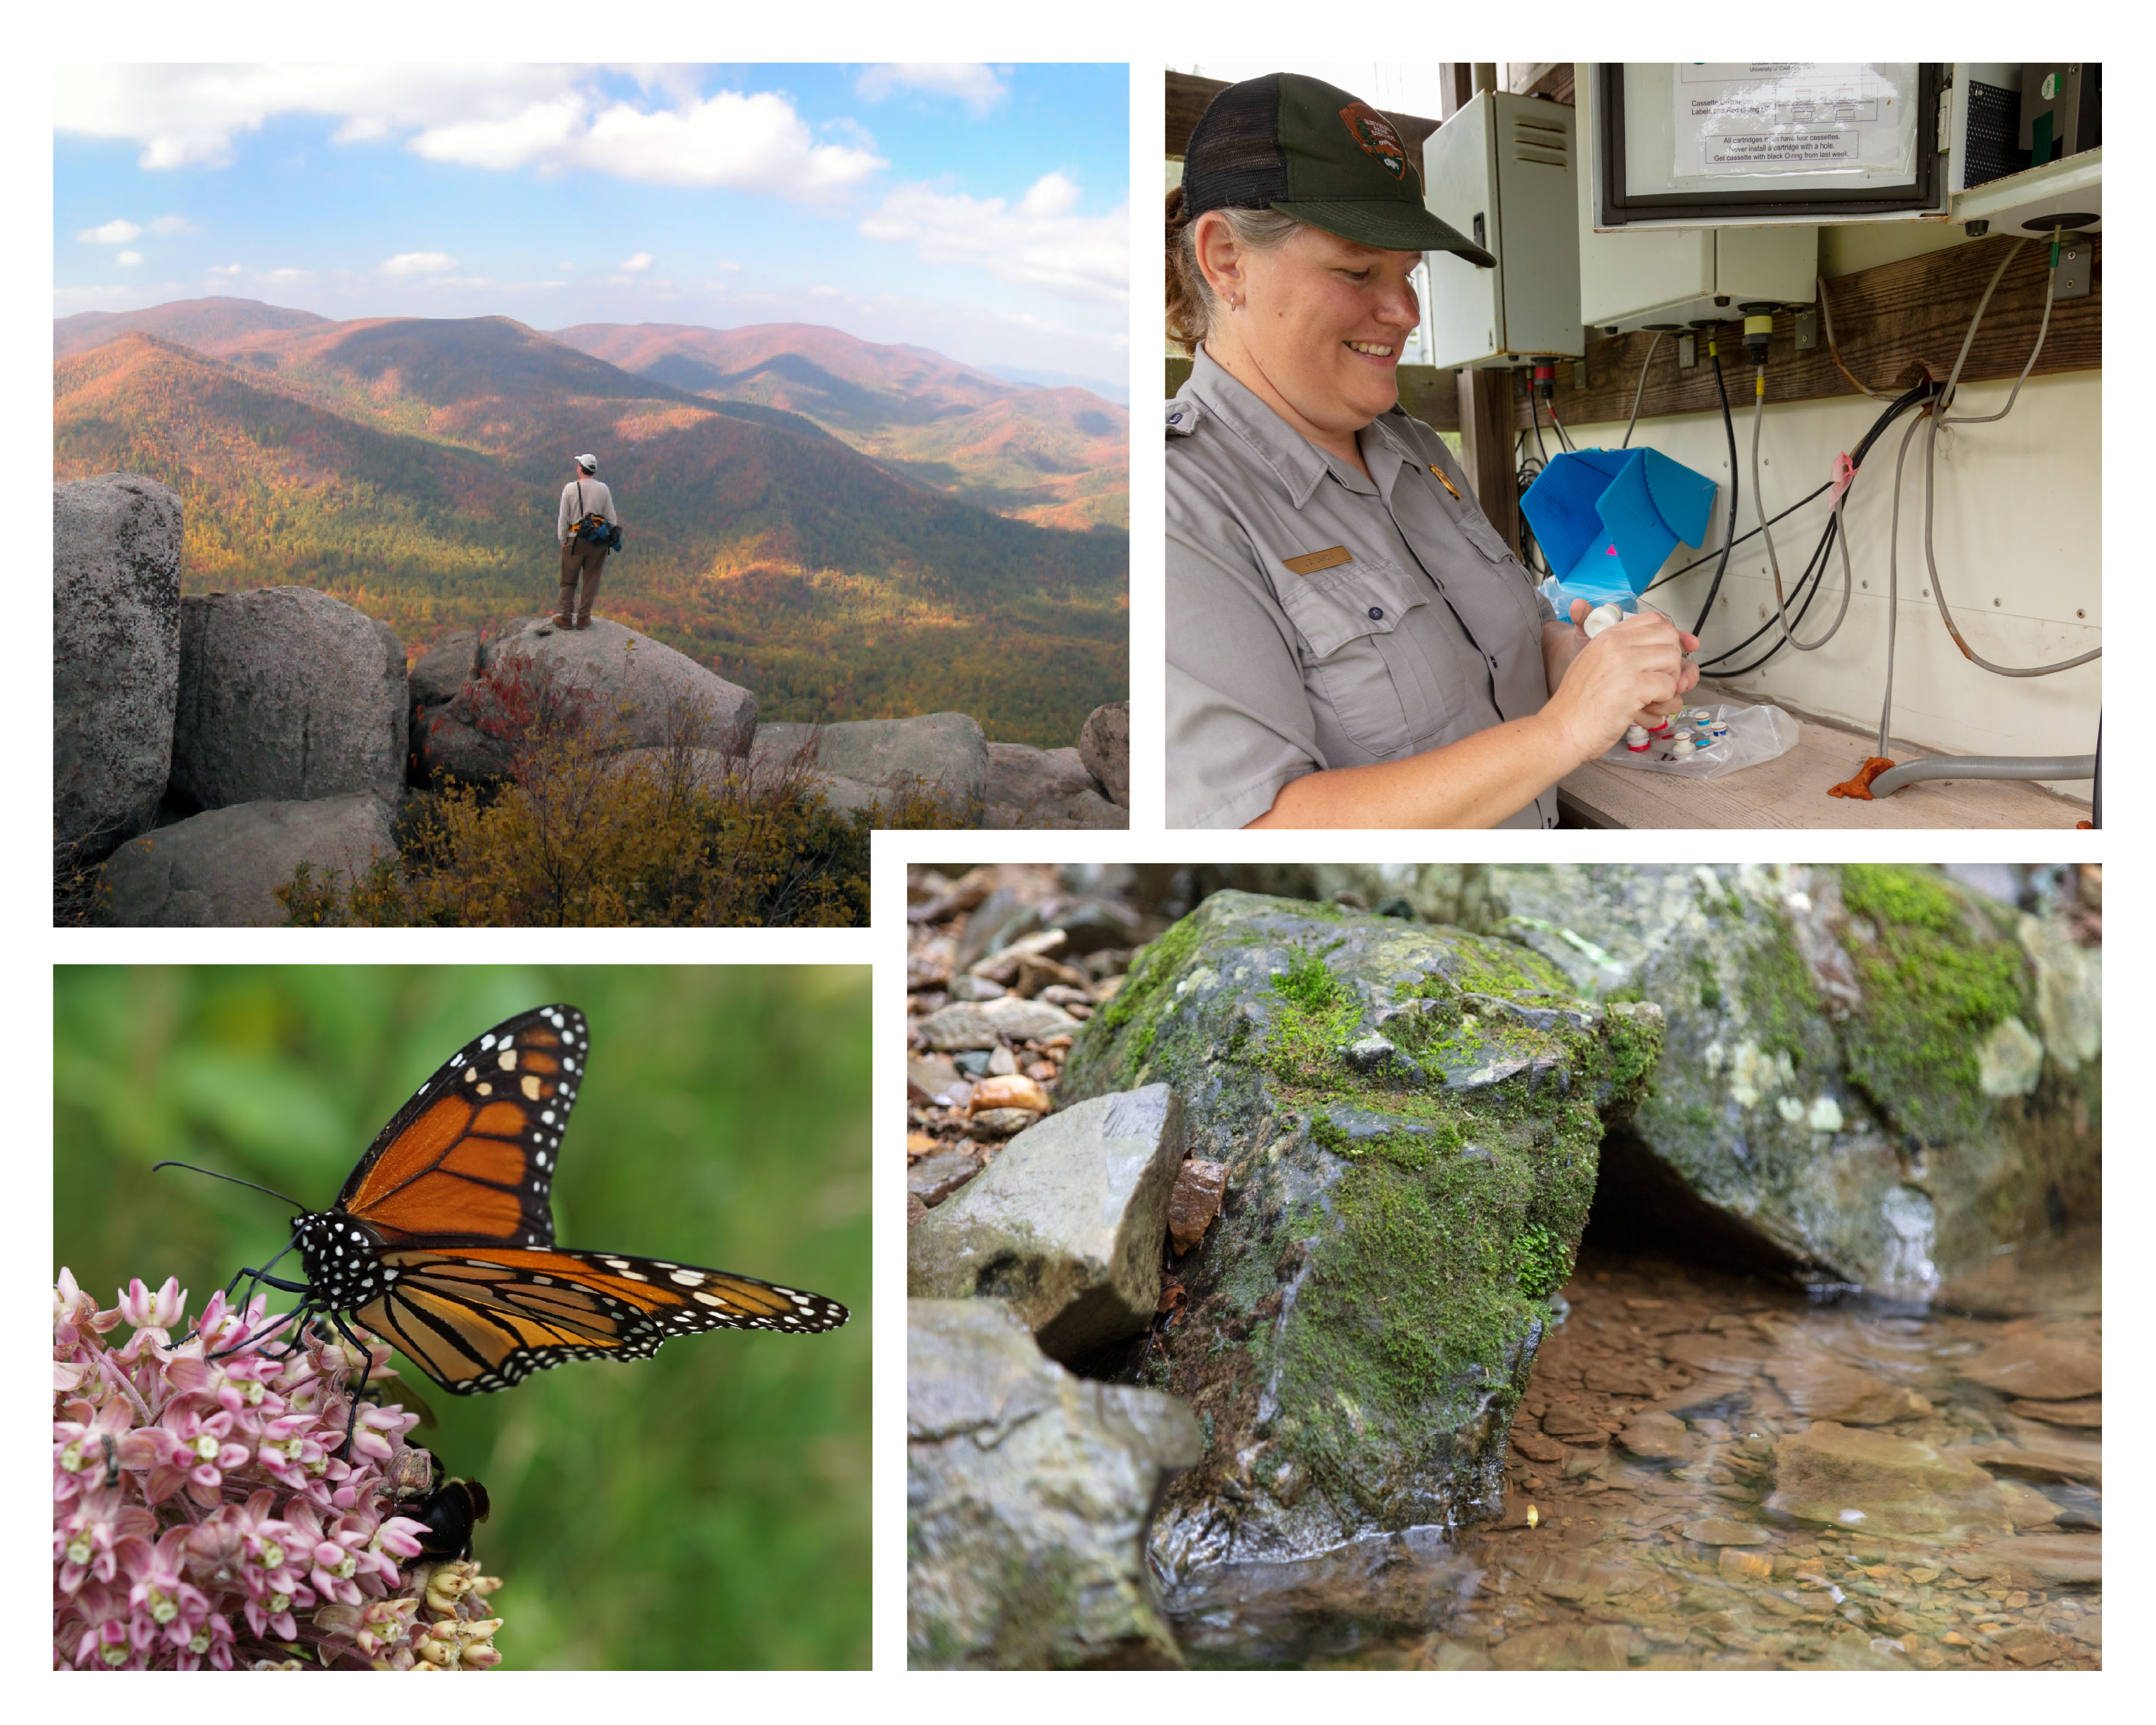 Collage of four photos. 1, a man overlooking the fall colors on mountains in the distance; 2, a NPS employee with air quality sampling equipment; 3, a butterfly on a milkweed flower; 4, moss and lichen covered boulders line a mountain stream.